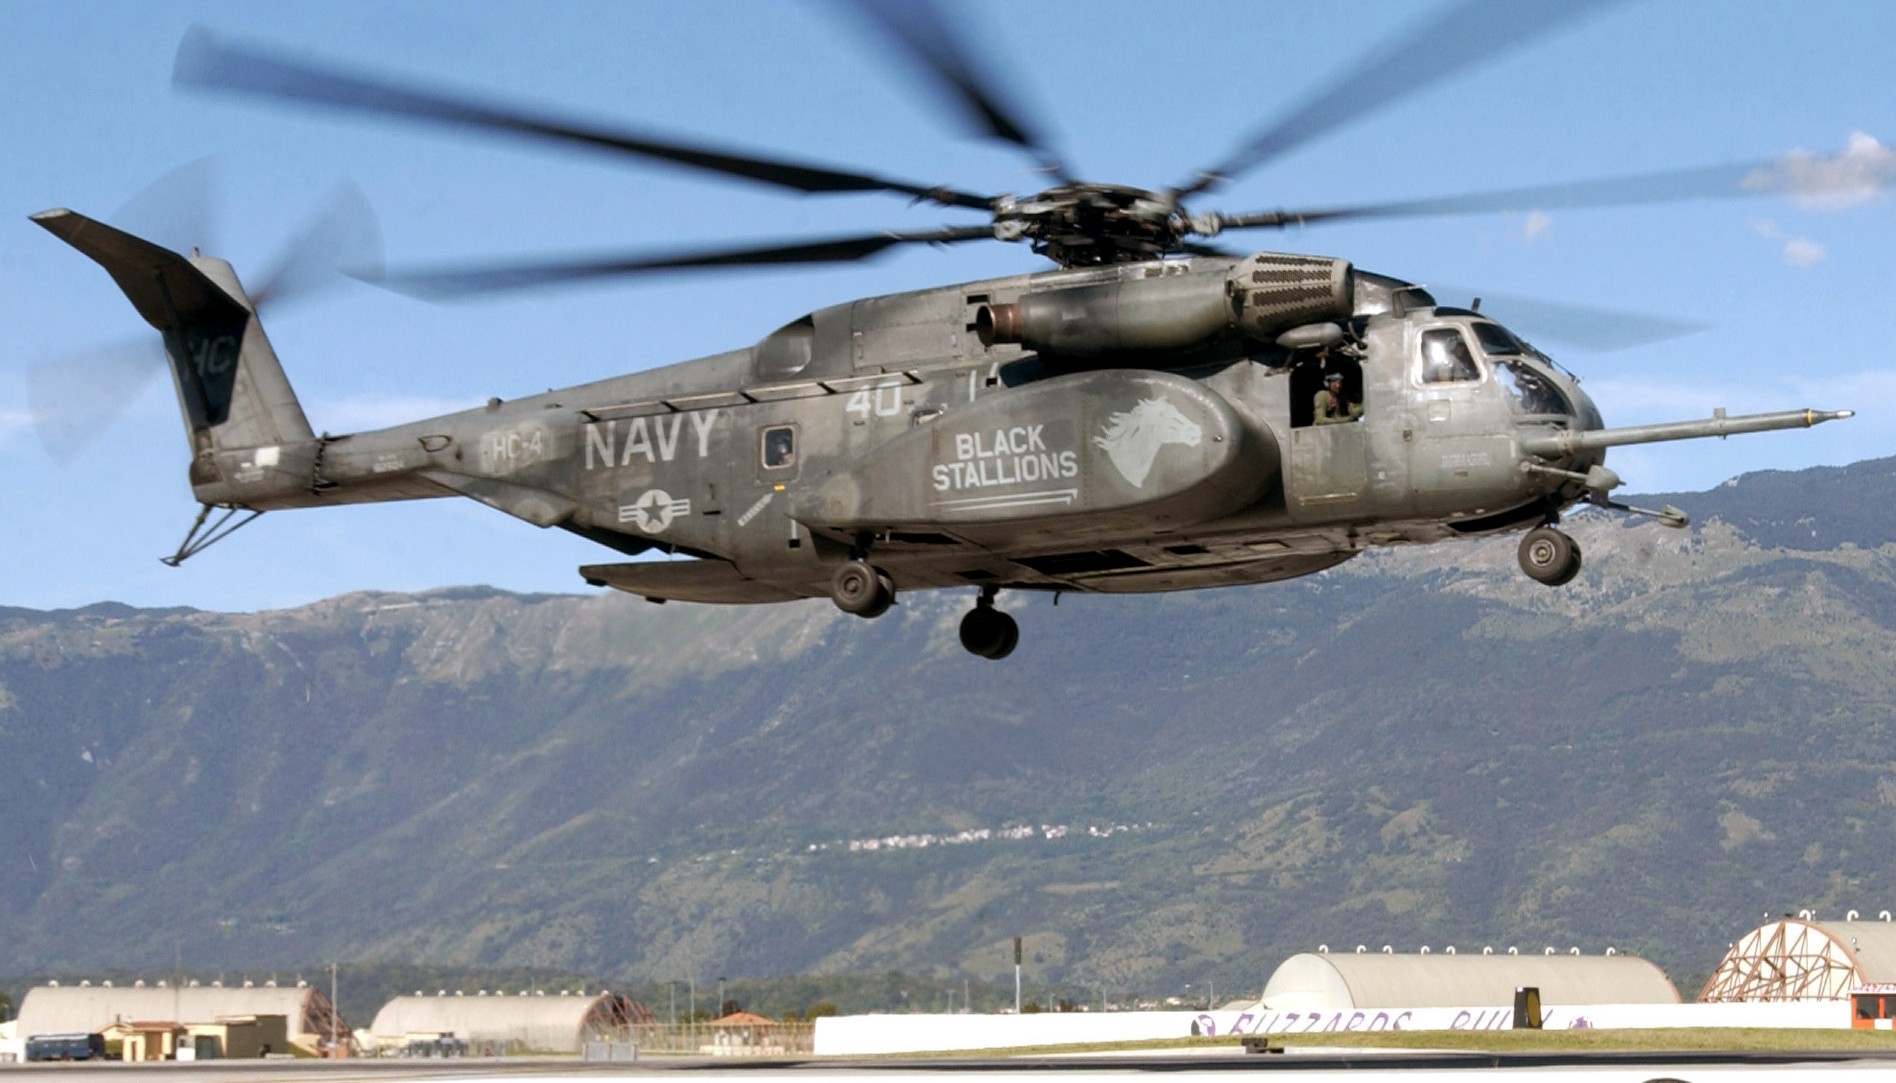 hc-4 black stallions helicopter combat support squadron mh-53e sea dragon 69 aviano air base italy